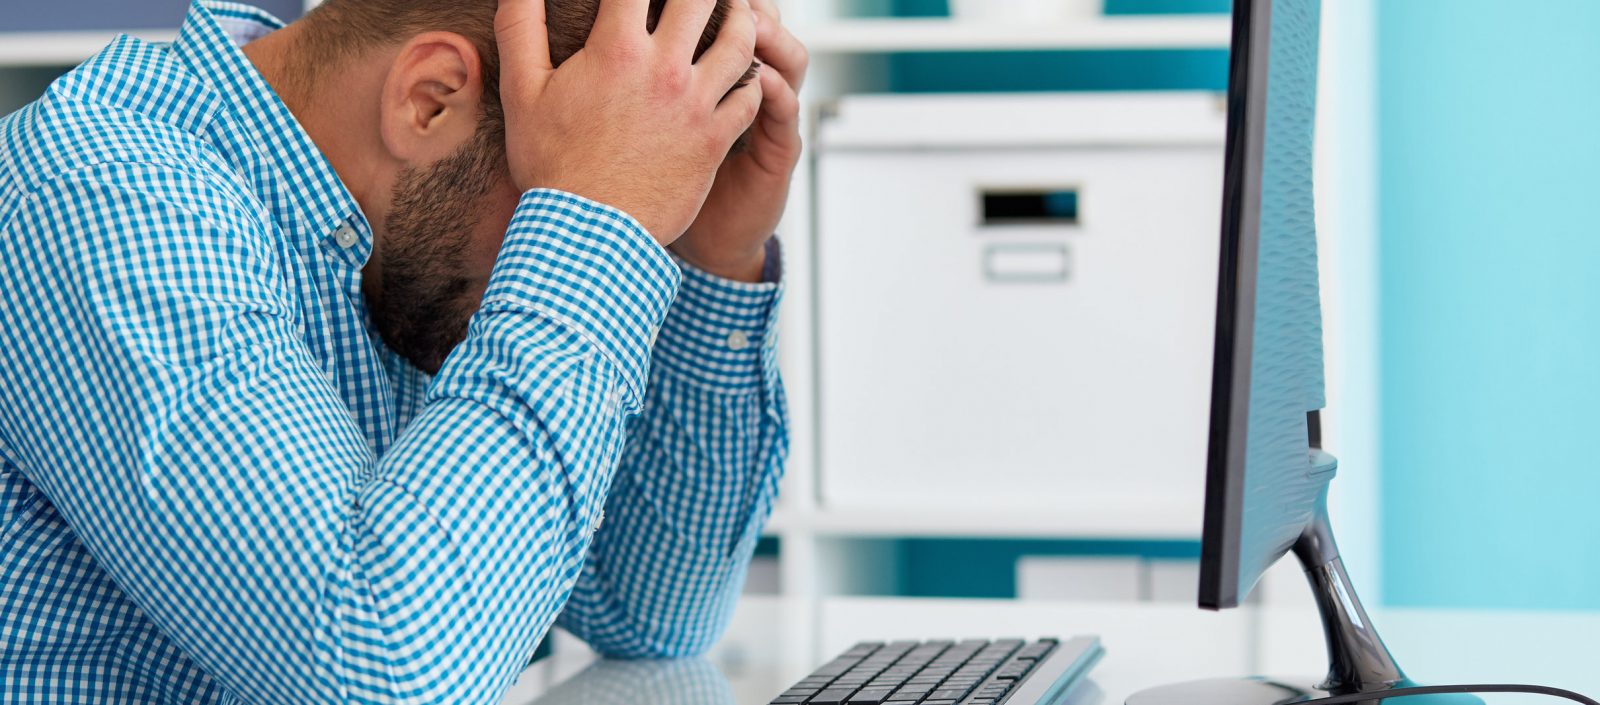 Why does employee scheduling software fail?